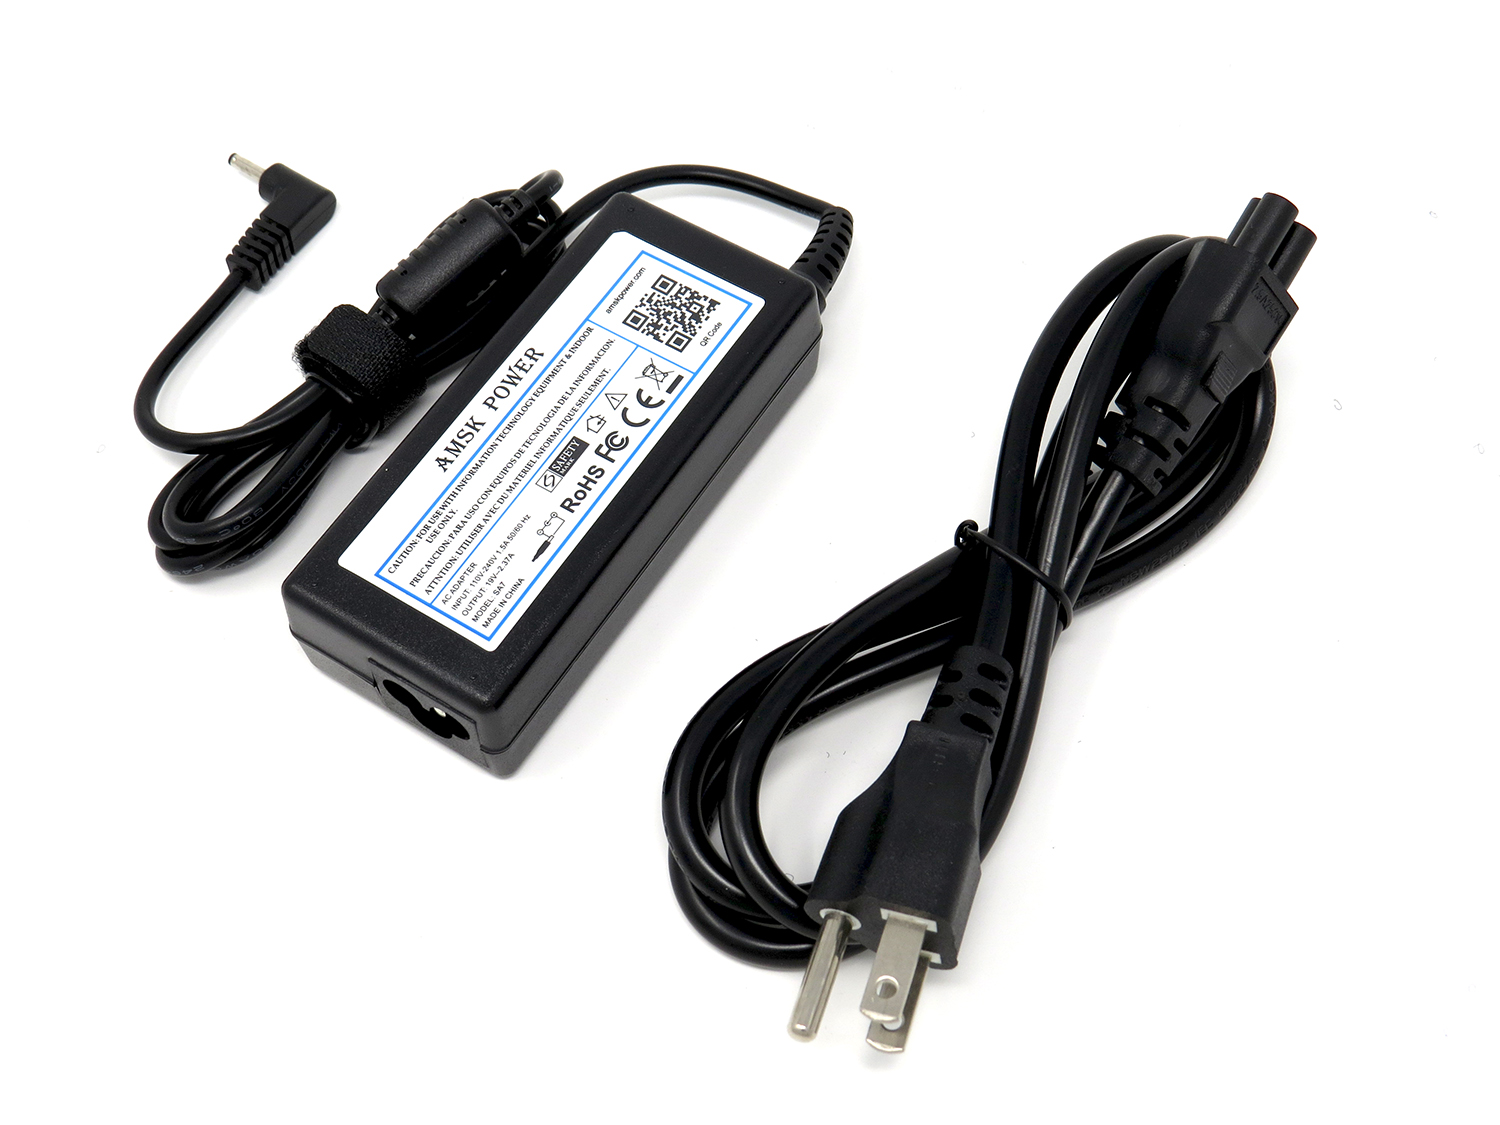 AMSK POWER AC Adapter for Samsung P/N: AA-PA3NS40/US AA-PA2N40L AD-4019P BA44-00278A PA-1400-14 AA-PA2N40S BA44-00279A AD-4019W - image 1 of 3